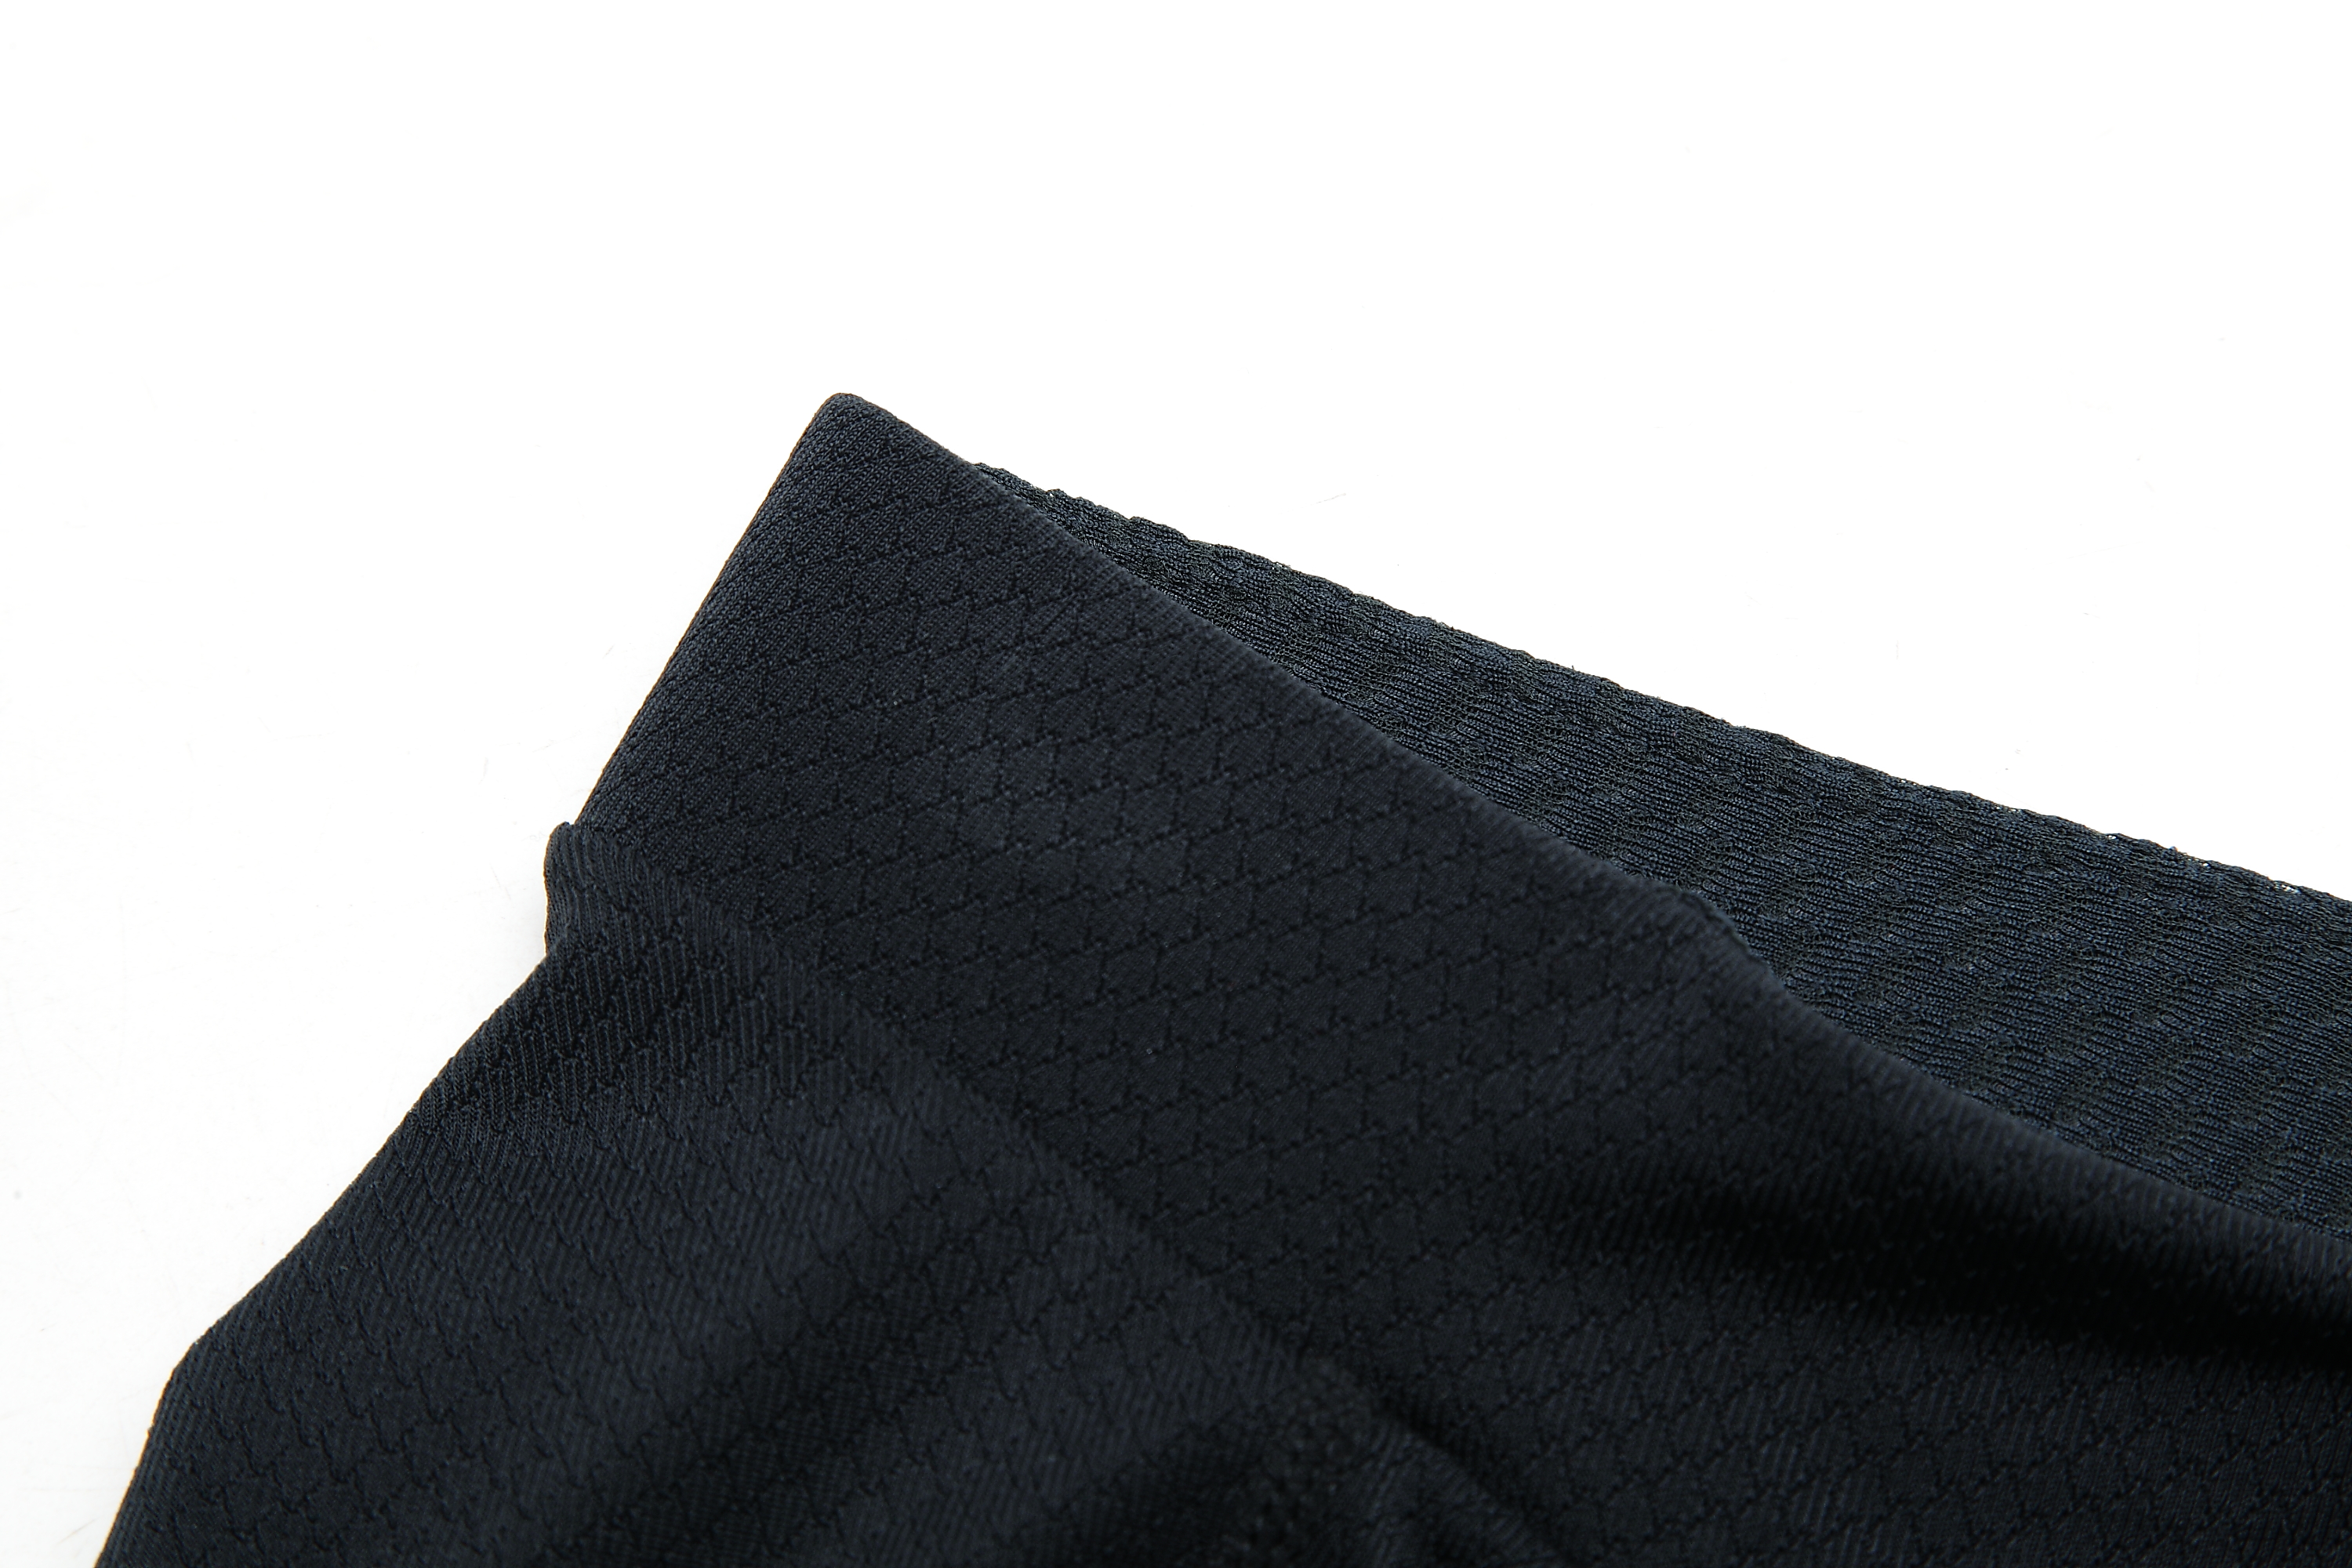 Men’s knitted cycling Shorts.